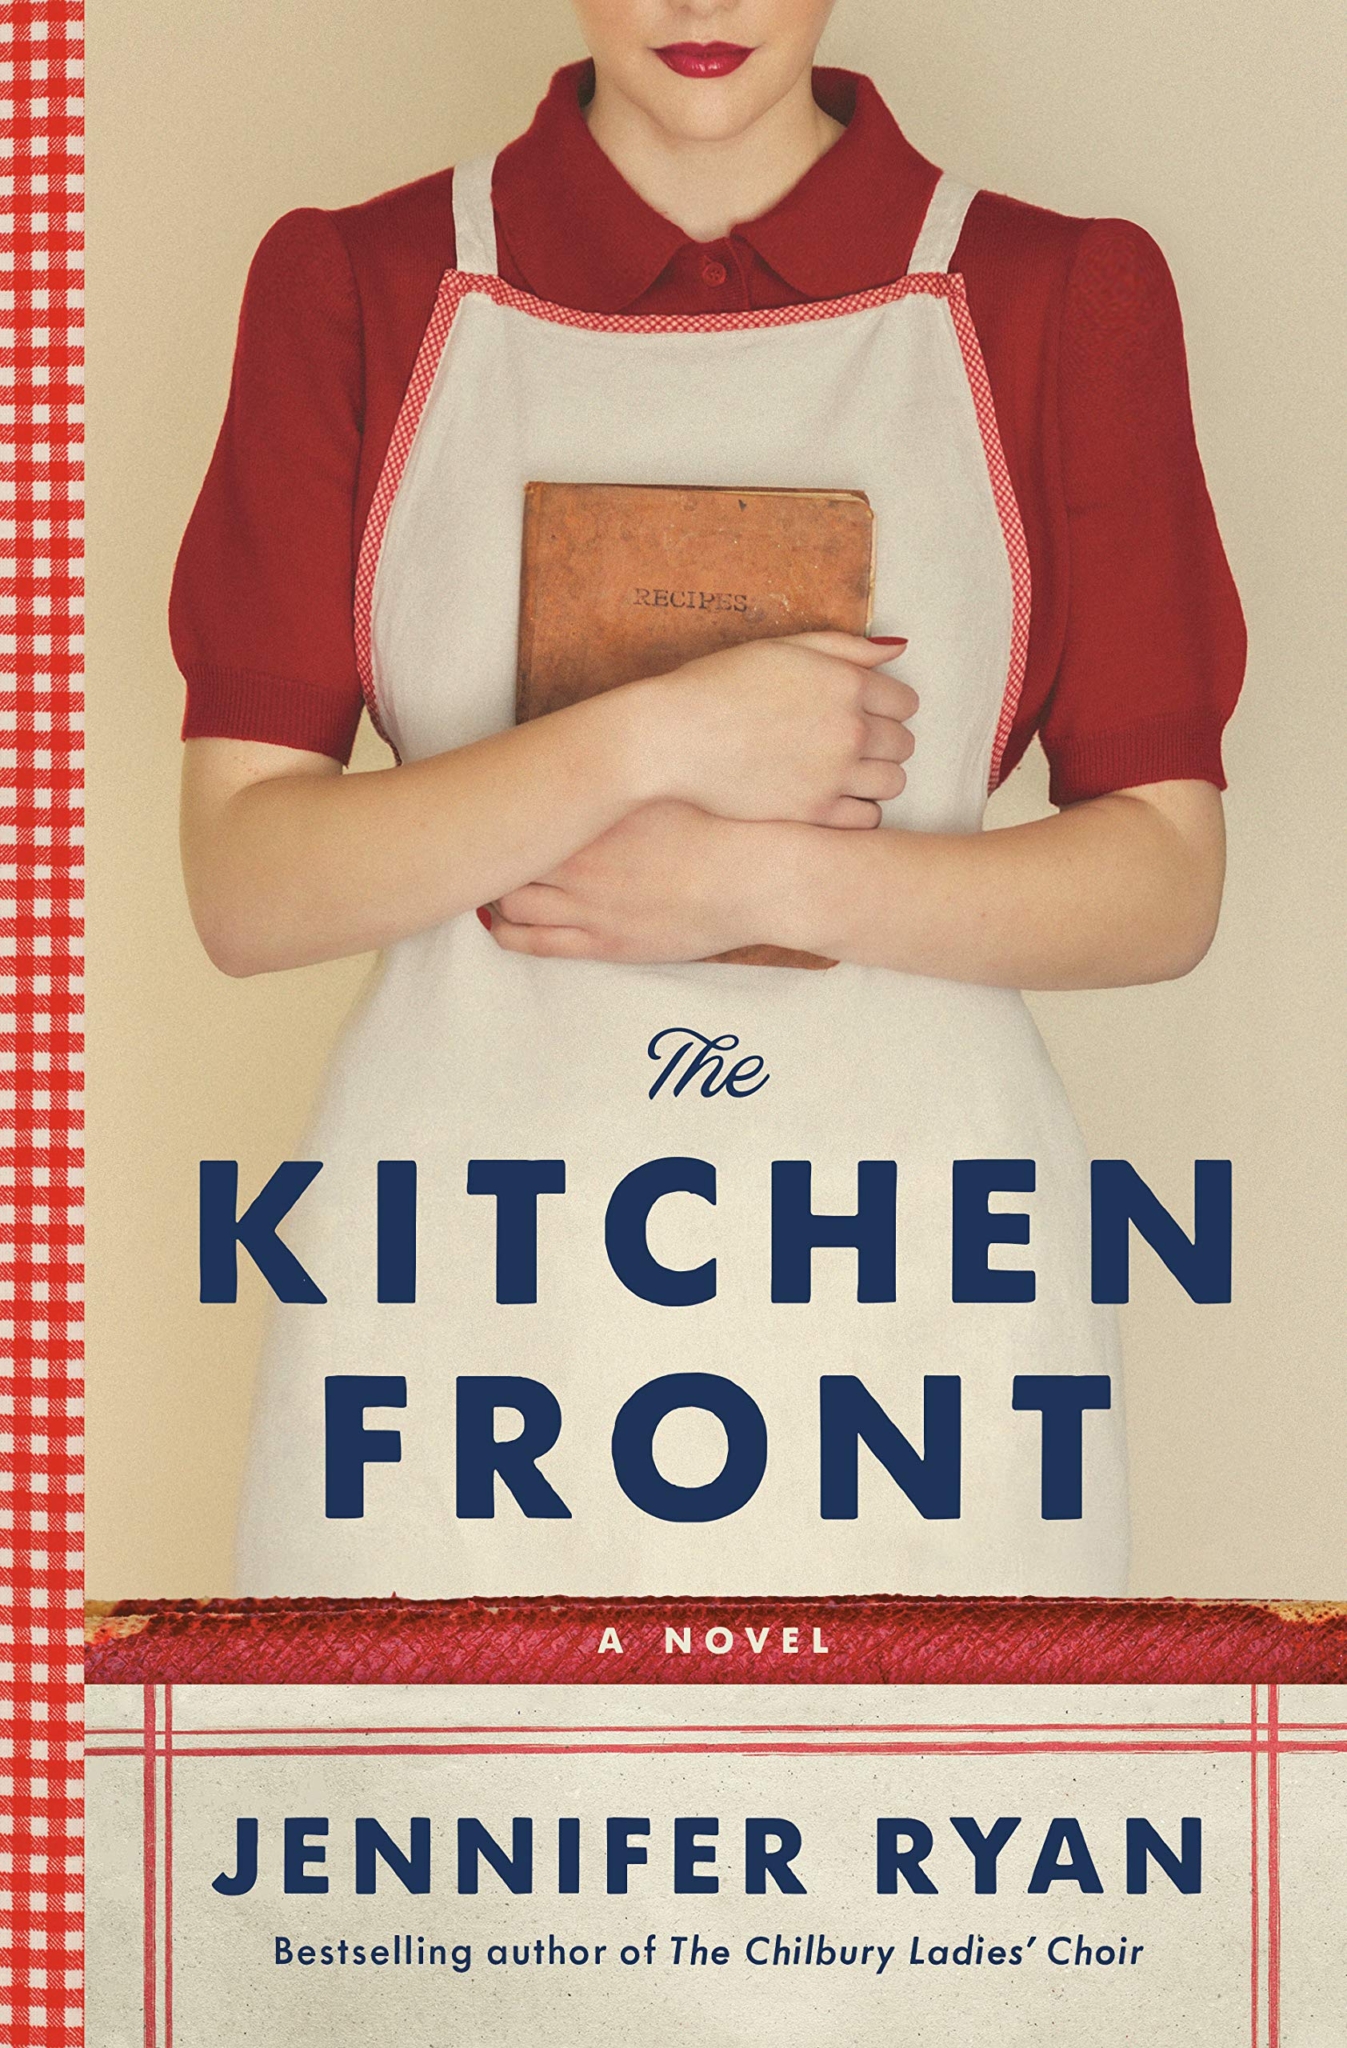 kitchenfrontlarge Birmingham-Southern Summer Book Clubs start July 26 - join now